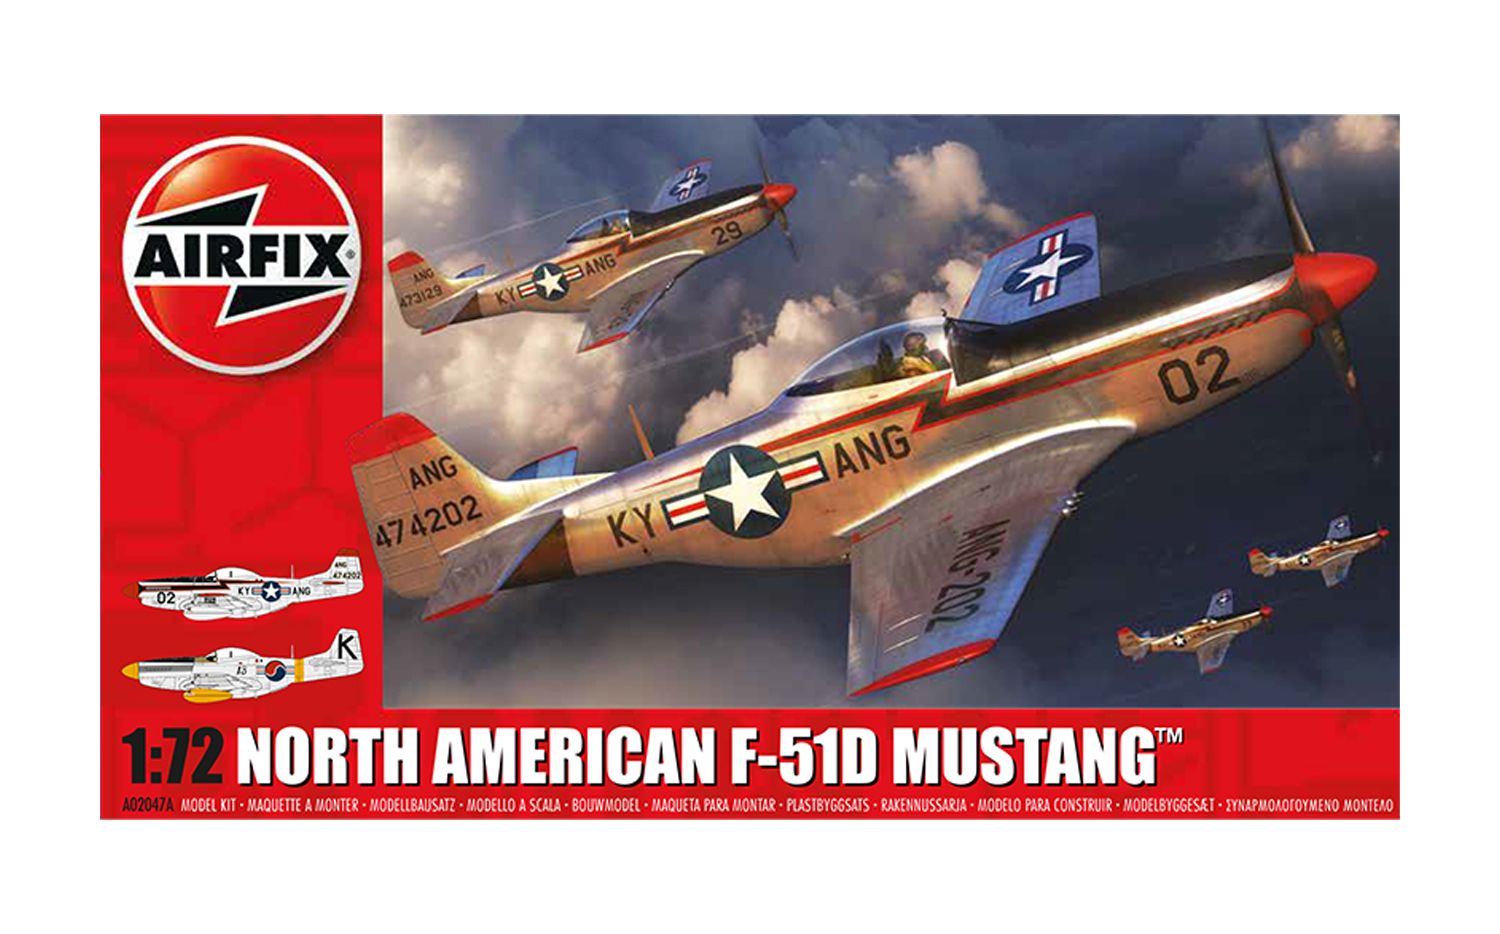 Airfix North American F-51D Mustang 1:72